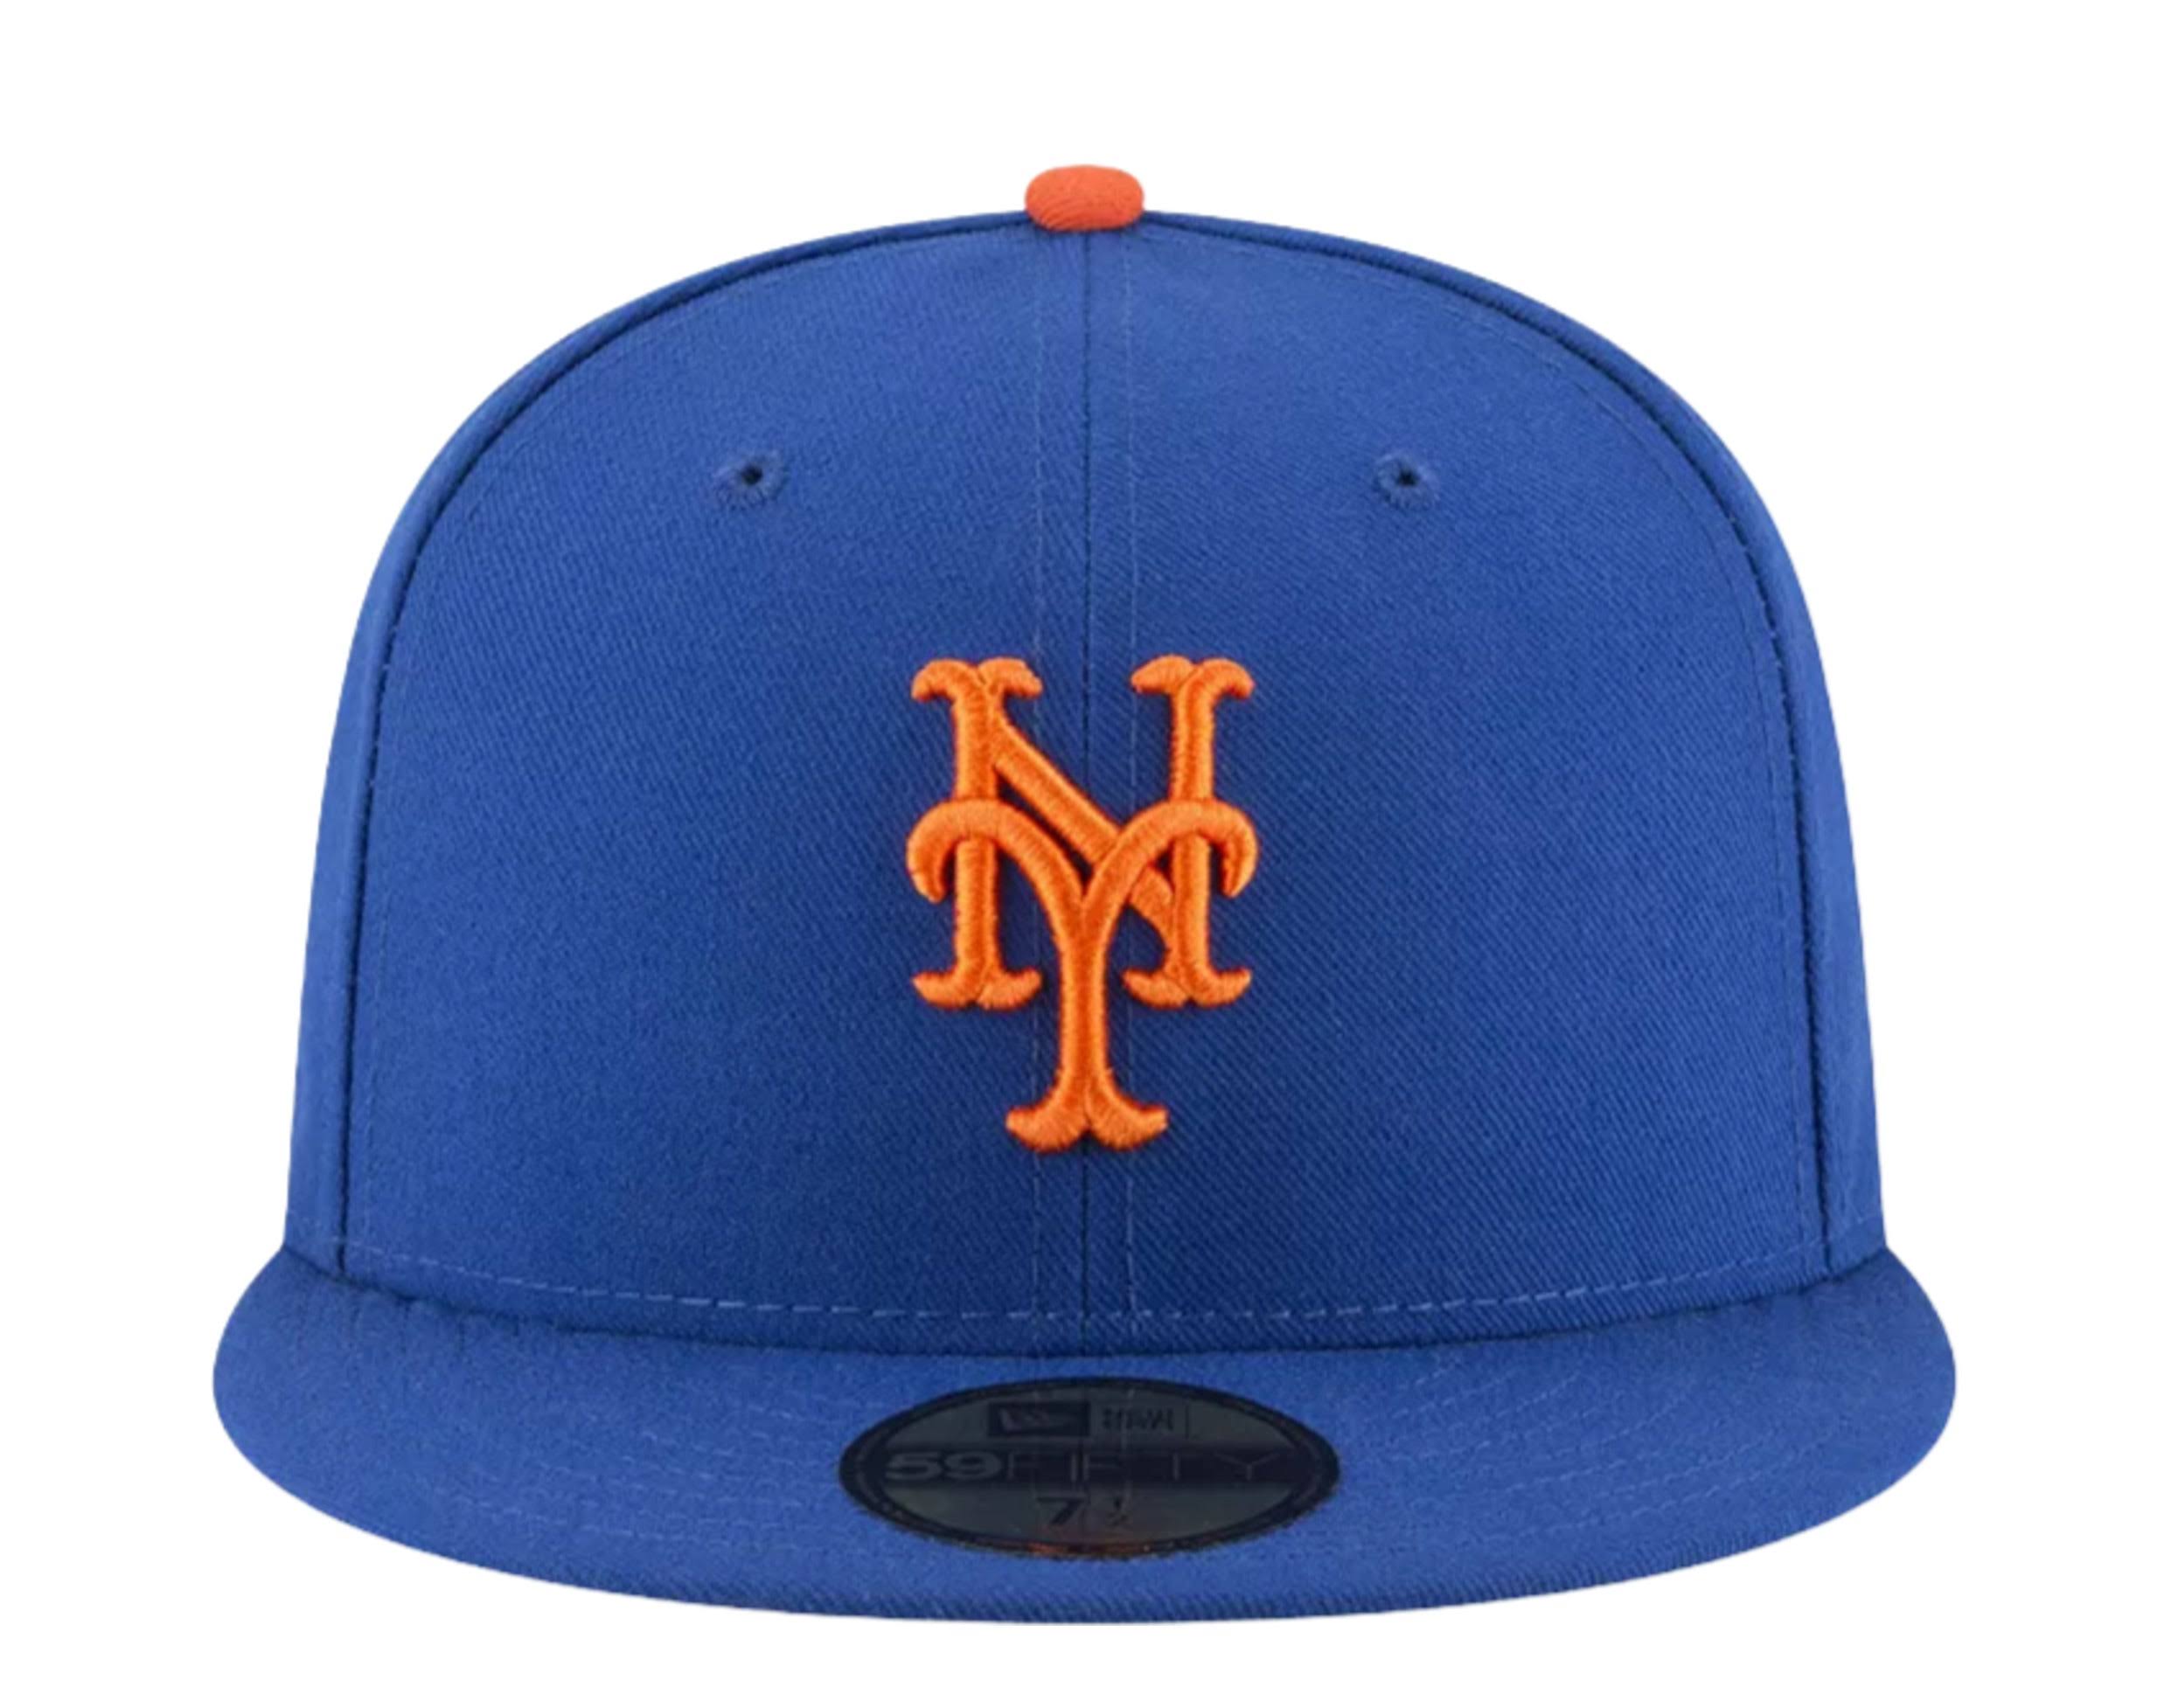 New Era 59FIFTY MLB New York Mets 9/11 Memorial Fitted Hat 7